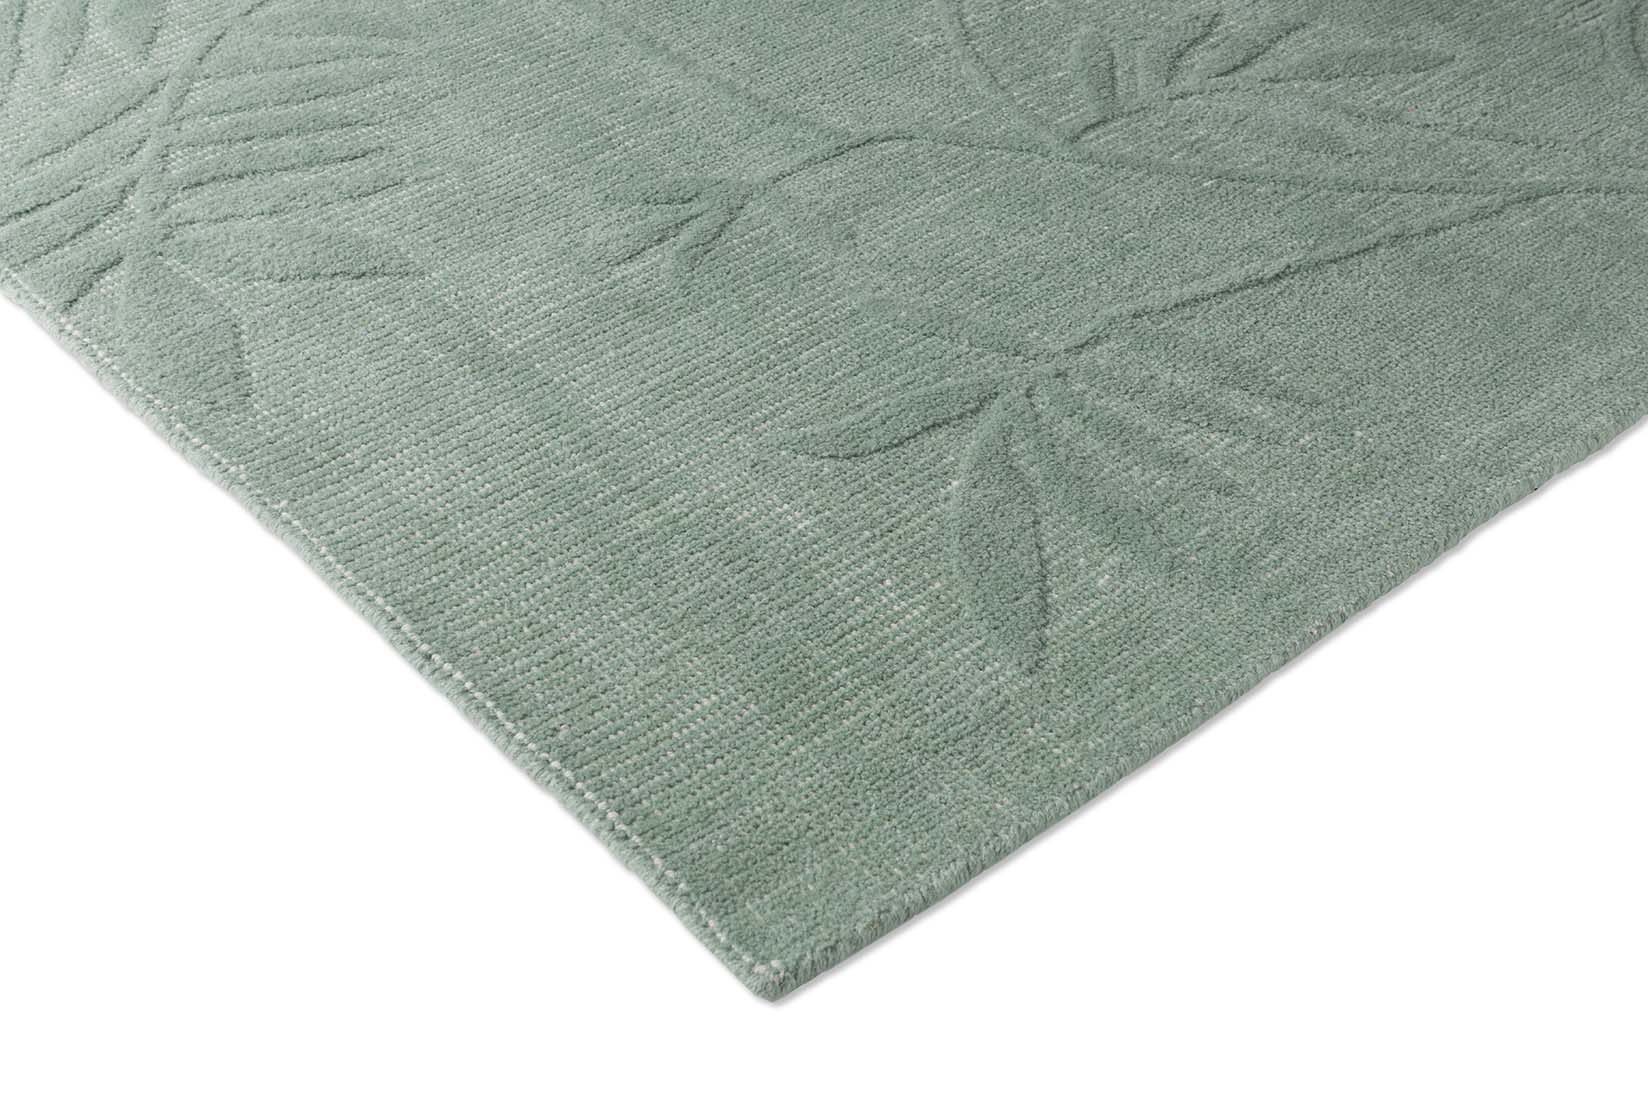 Green wool rug with floral pattern
